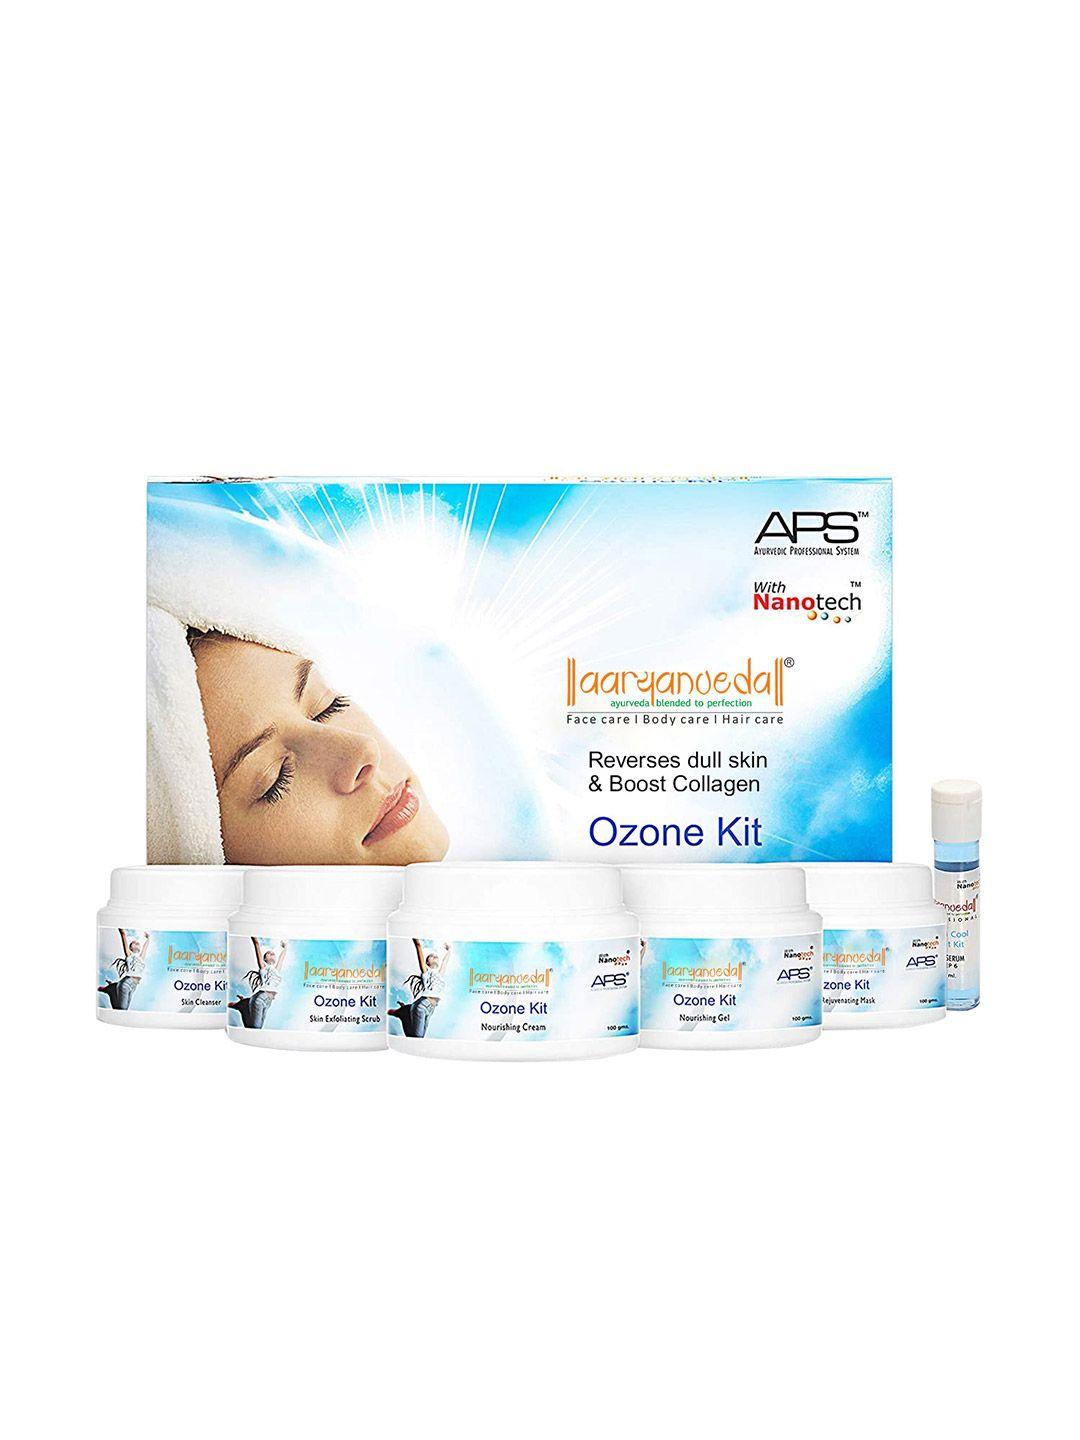 aryanveda ozone aps facial kit for dull skin & protection from harmful uv rays - 510 g